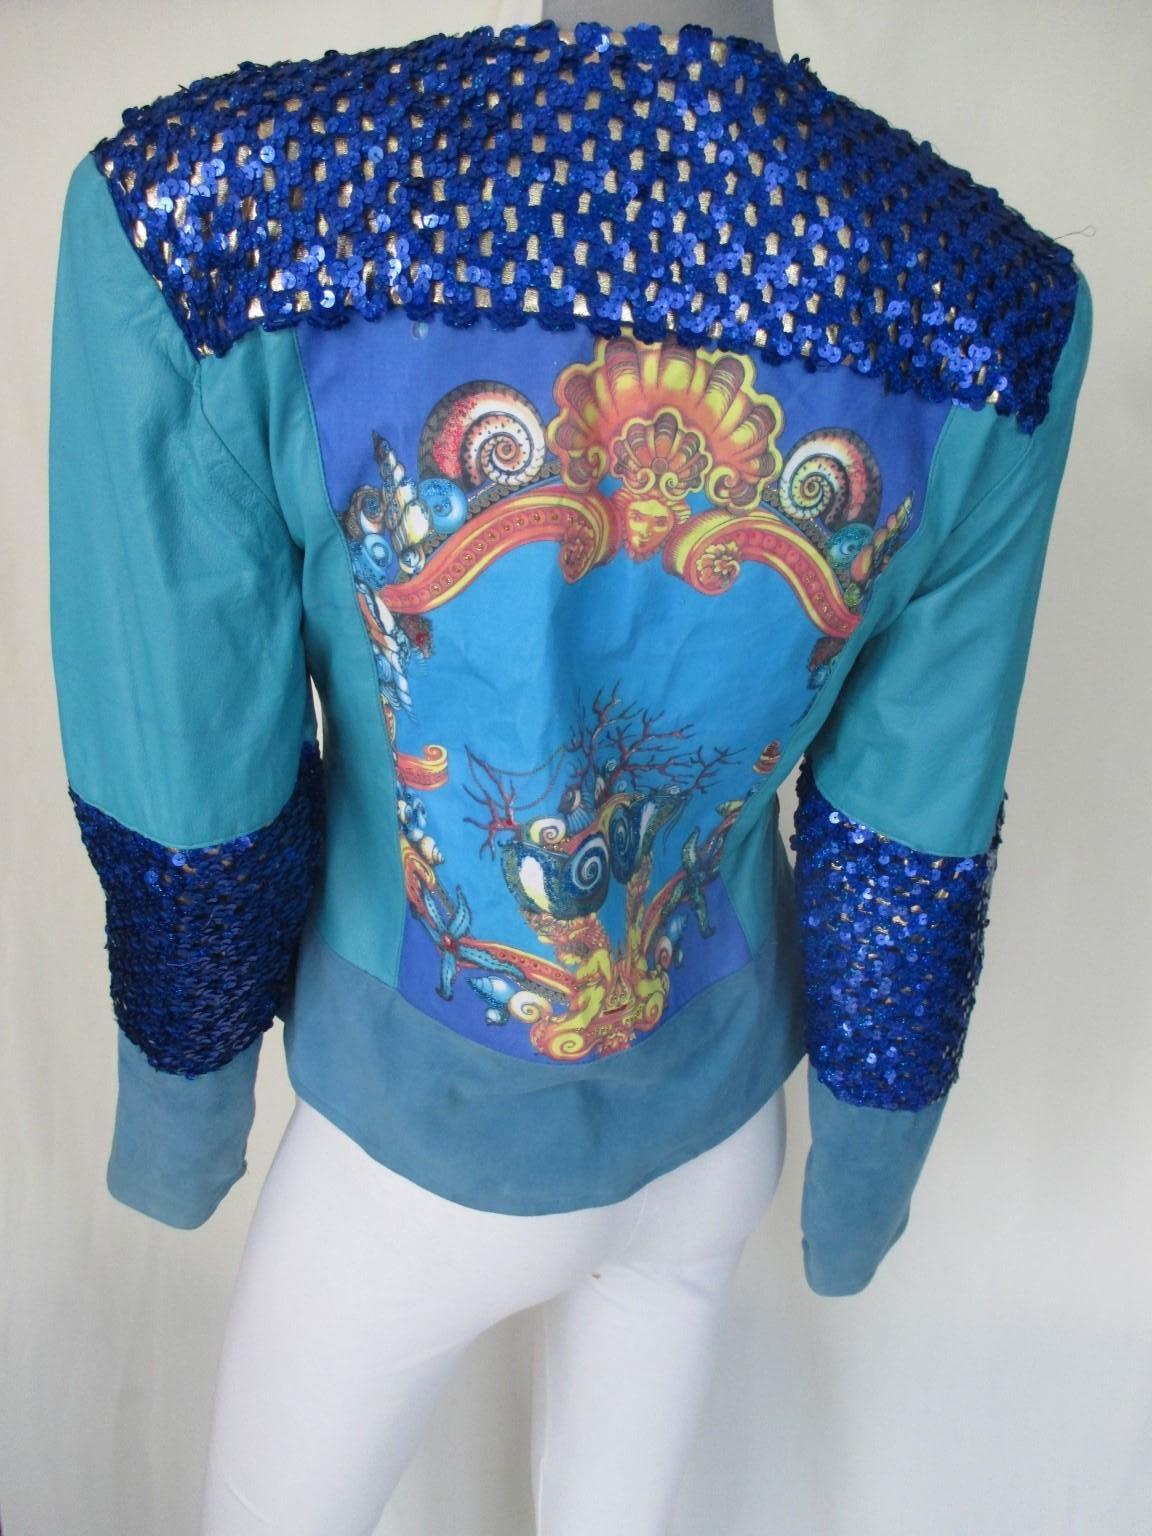 Unique 1980's turquoise soft leather jacket with embroided details and a print at the center back
Sleeves with sequines, leather and suede, no pockets with shoulder pads
Good vintage condition a few spots on the leather, see pictures
Designer: Petra